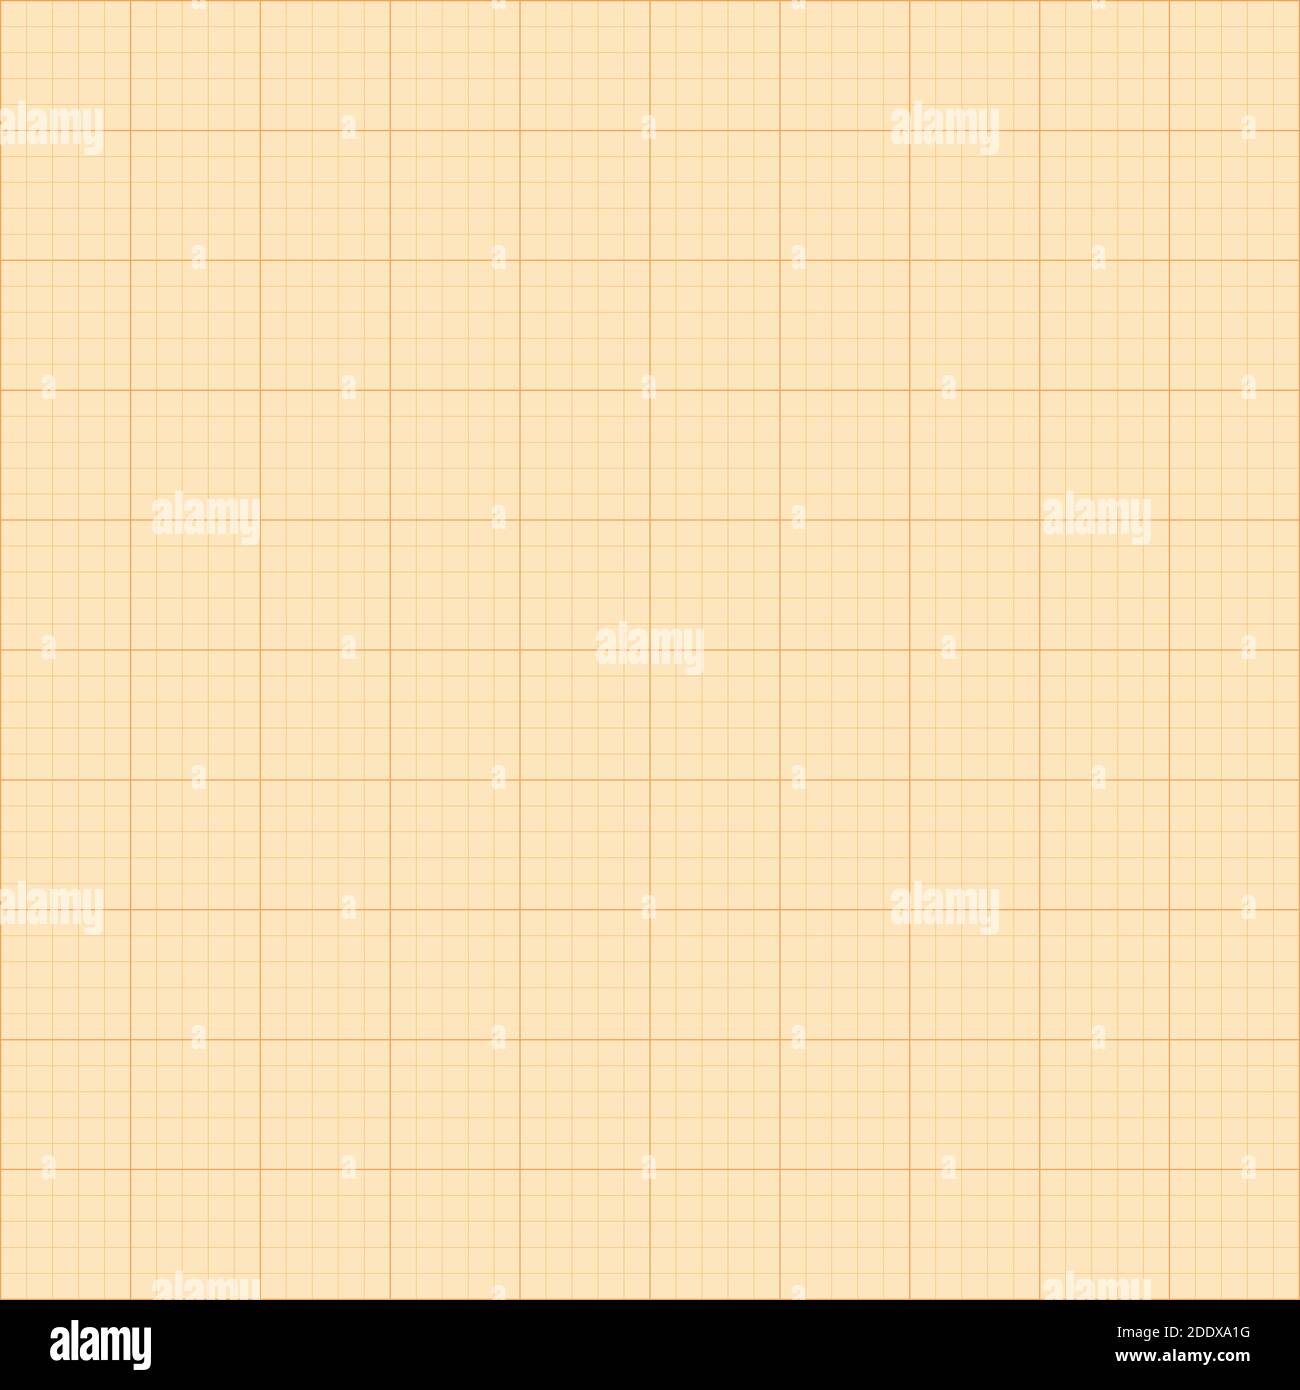 Old sepia graph paper square grid background. Stock Vector